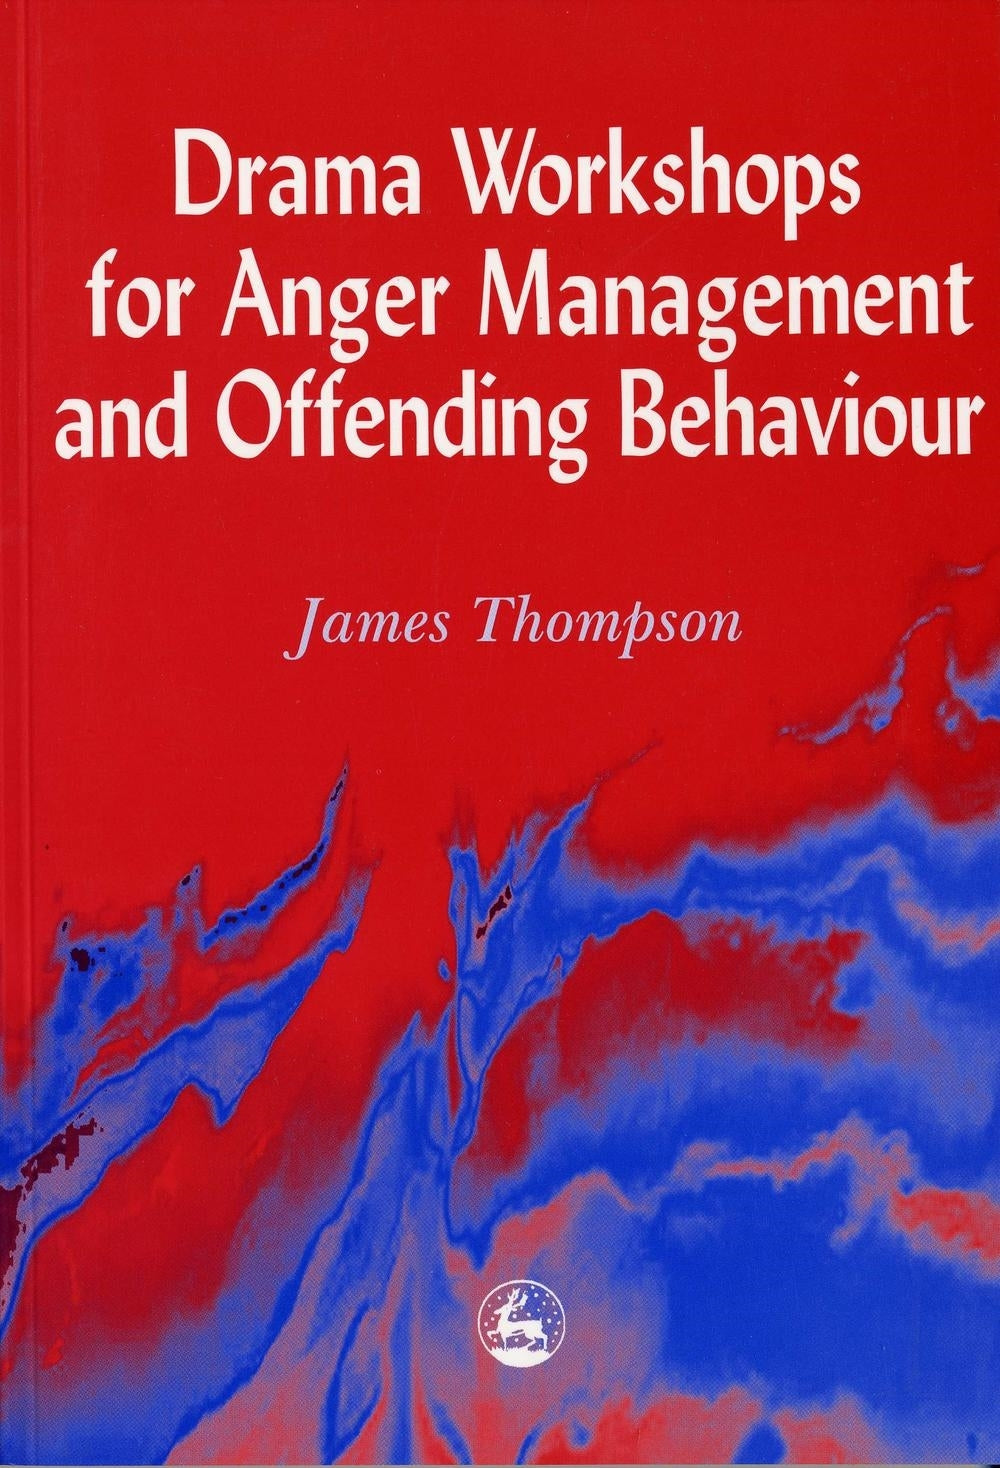 Drama Workshops for Anger Management and Offending Behaviour by James Thompson